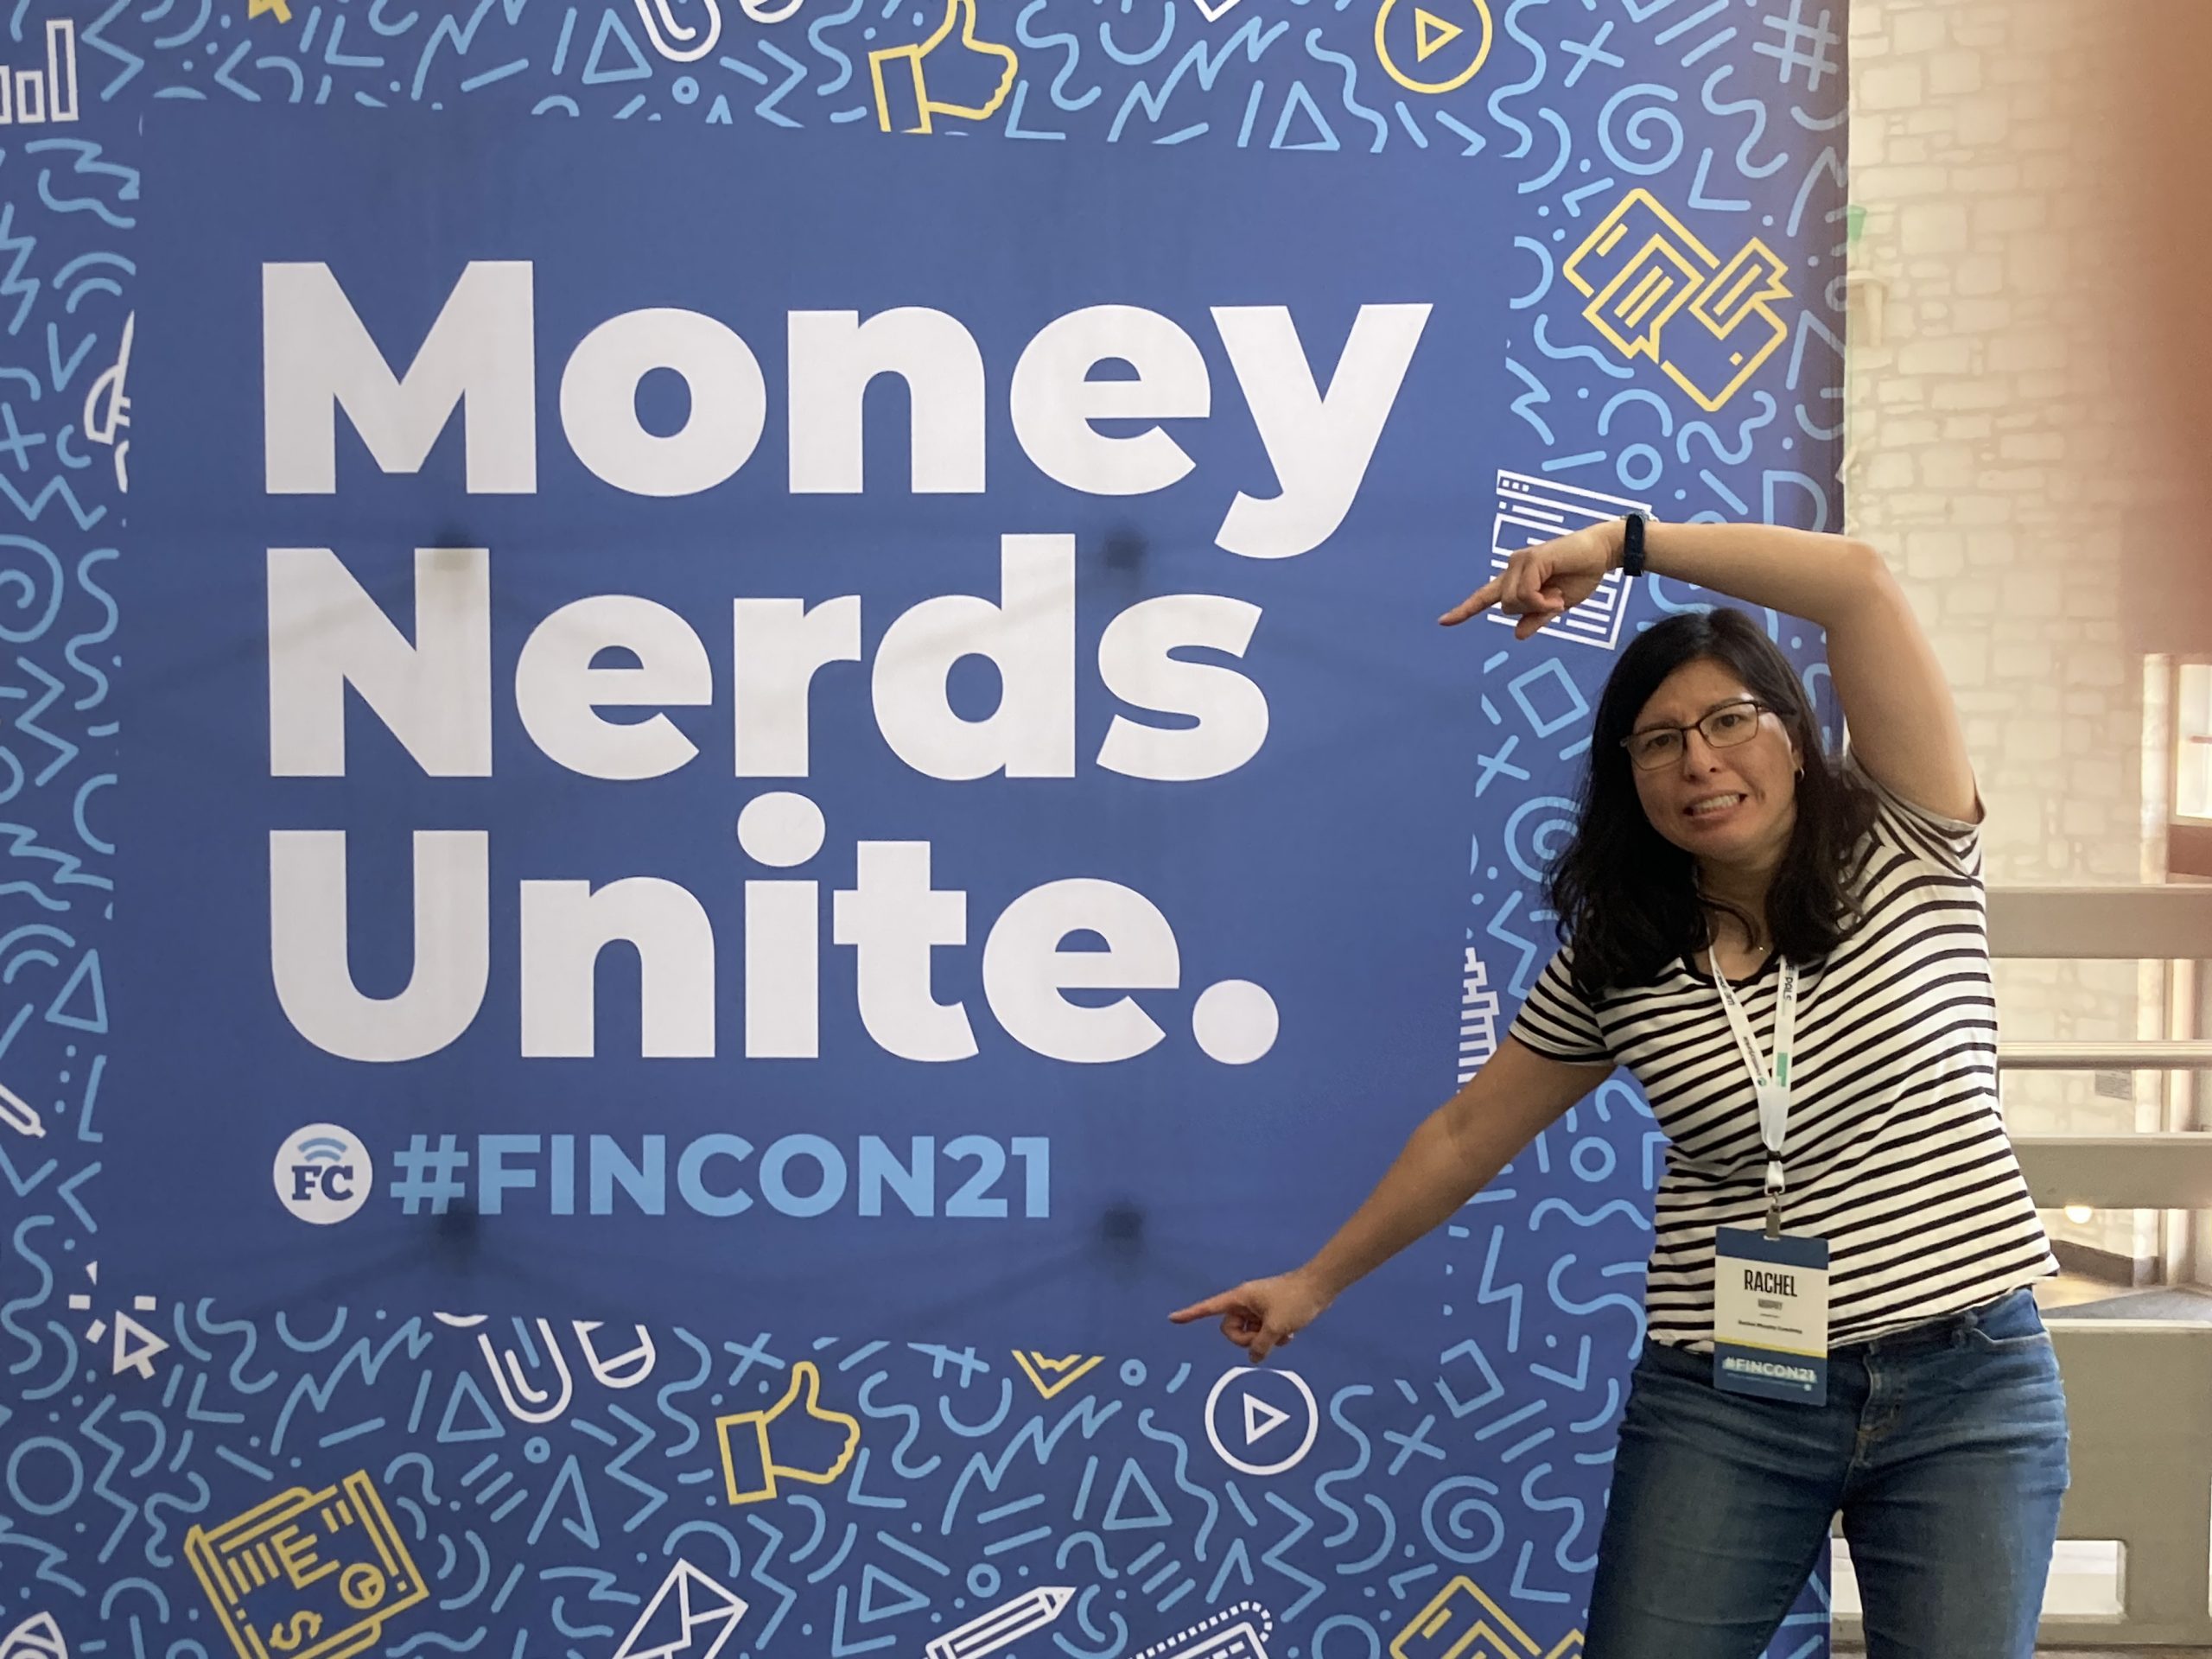 Rachel in front of the FinCon sign